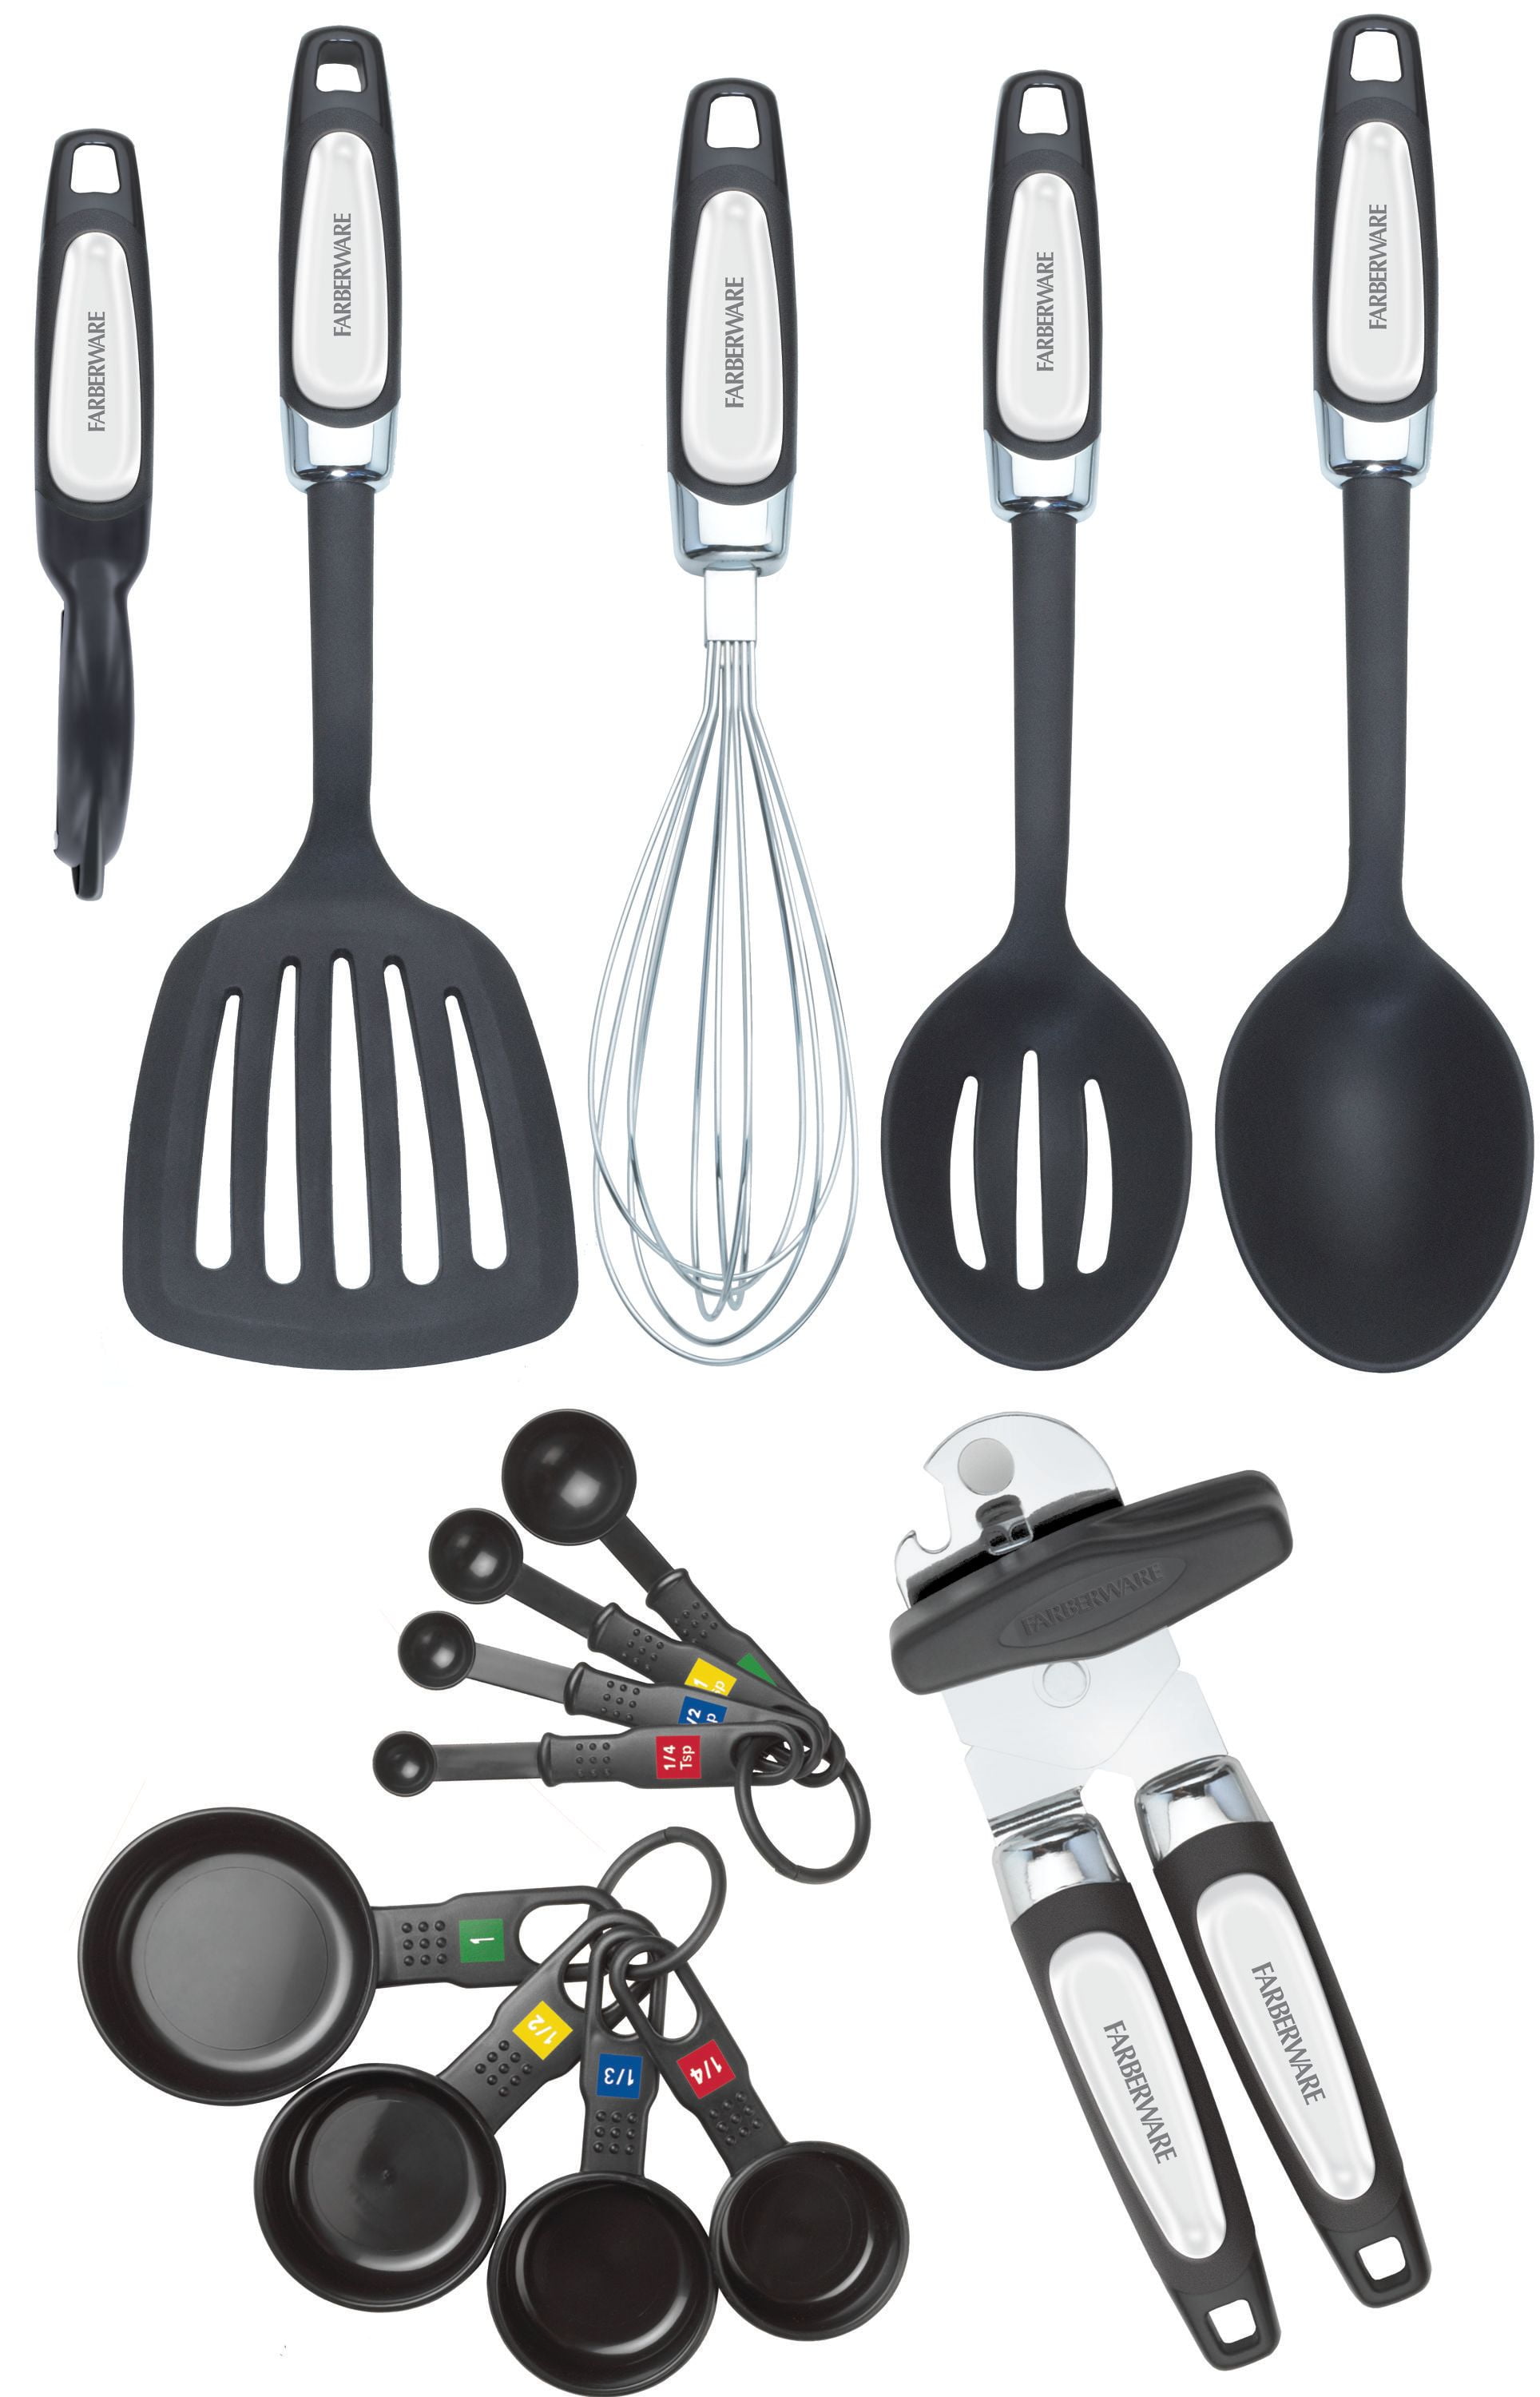 49 A+ Kitchen Gadgets, Tools, And Appliances For The Aspiring At